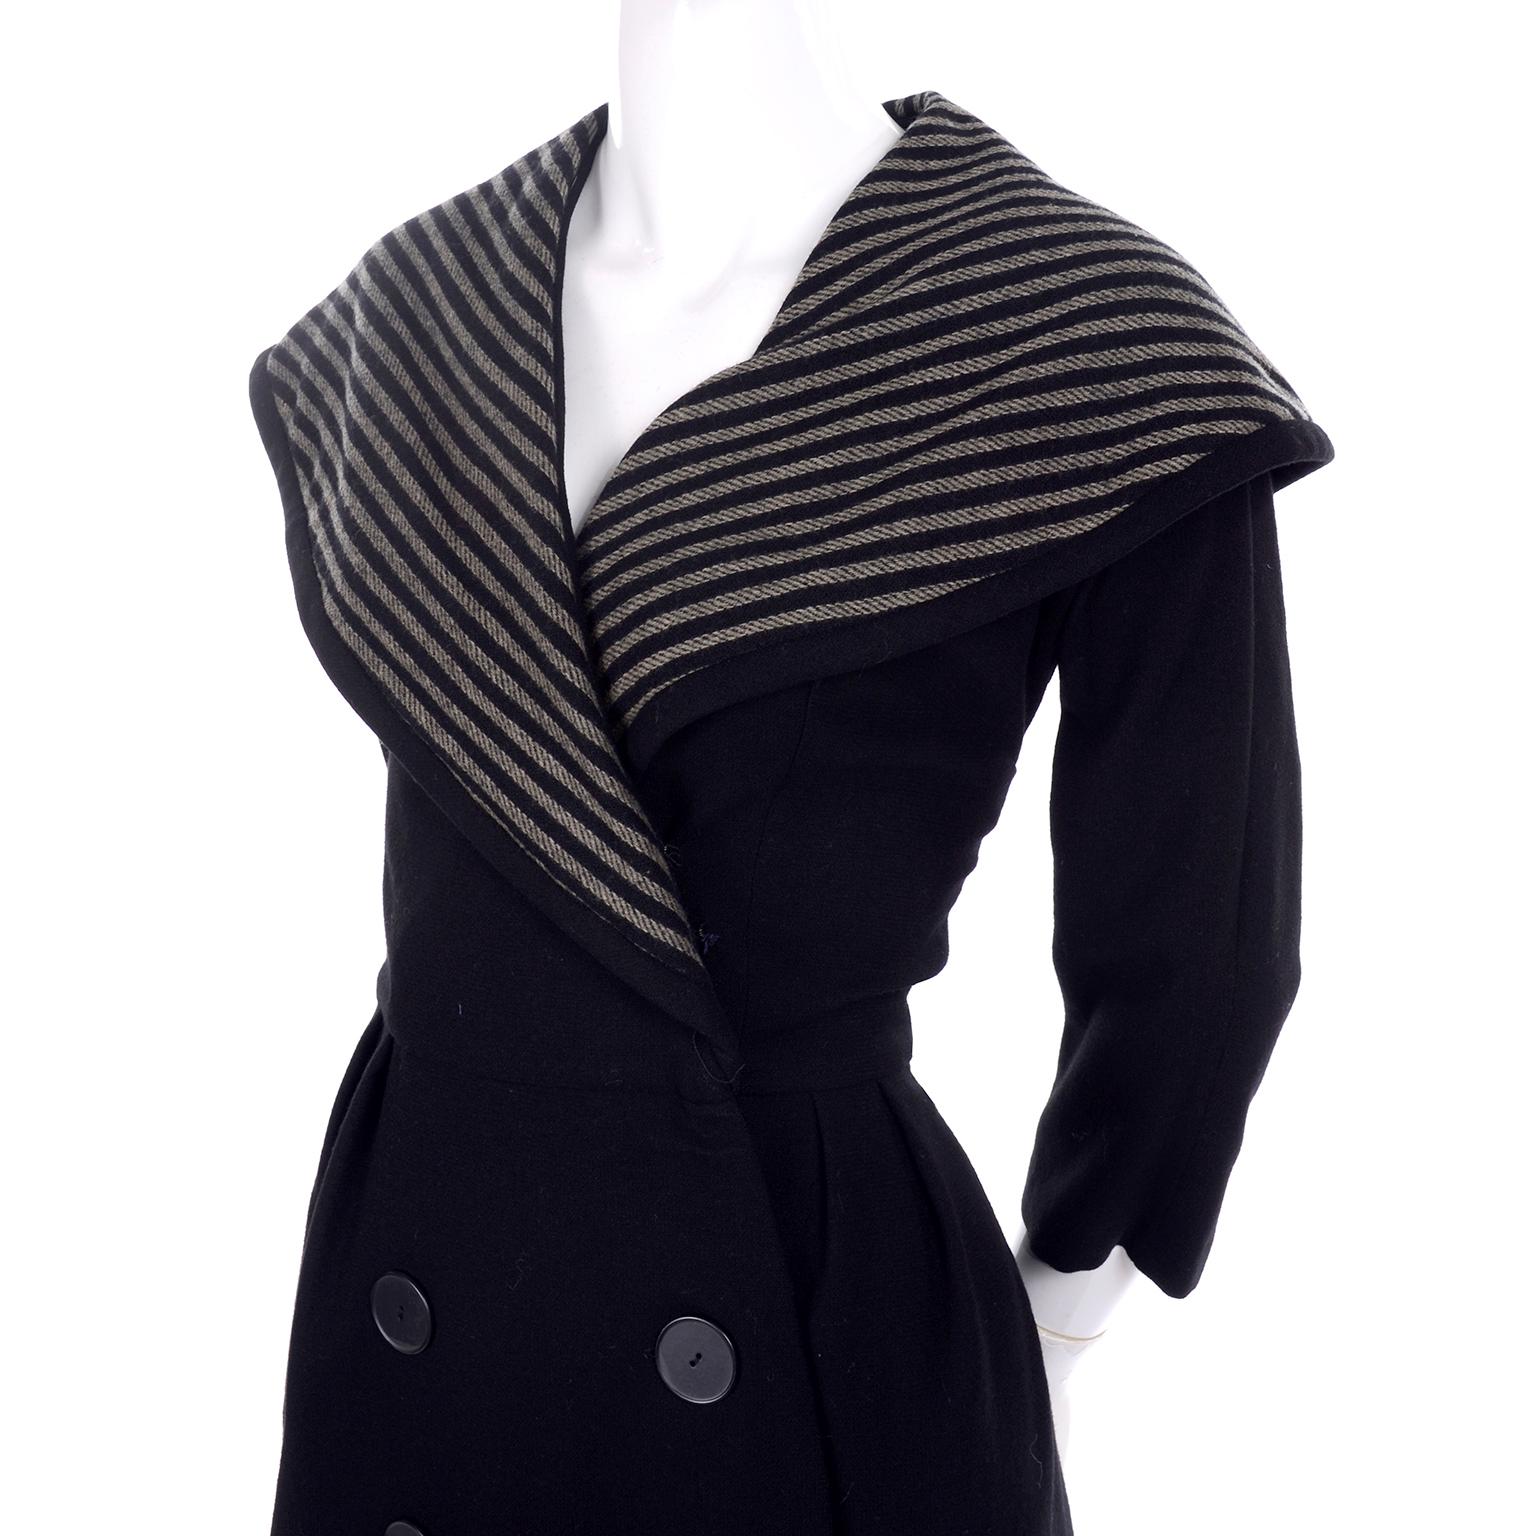 Women's Vintage Edwardian 1910s Black and Gray Wool Walking Coat Jacket With Wide Collar